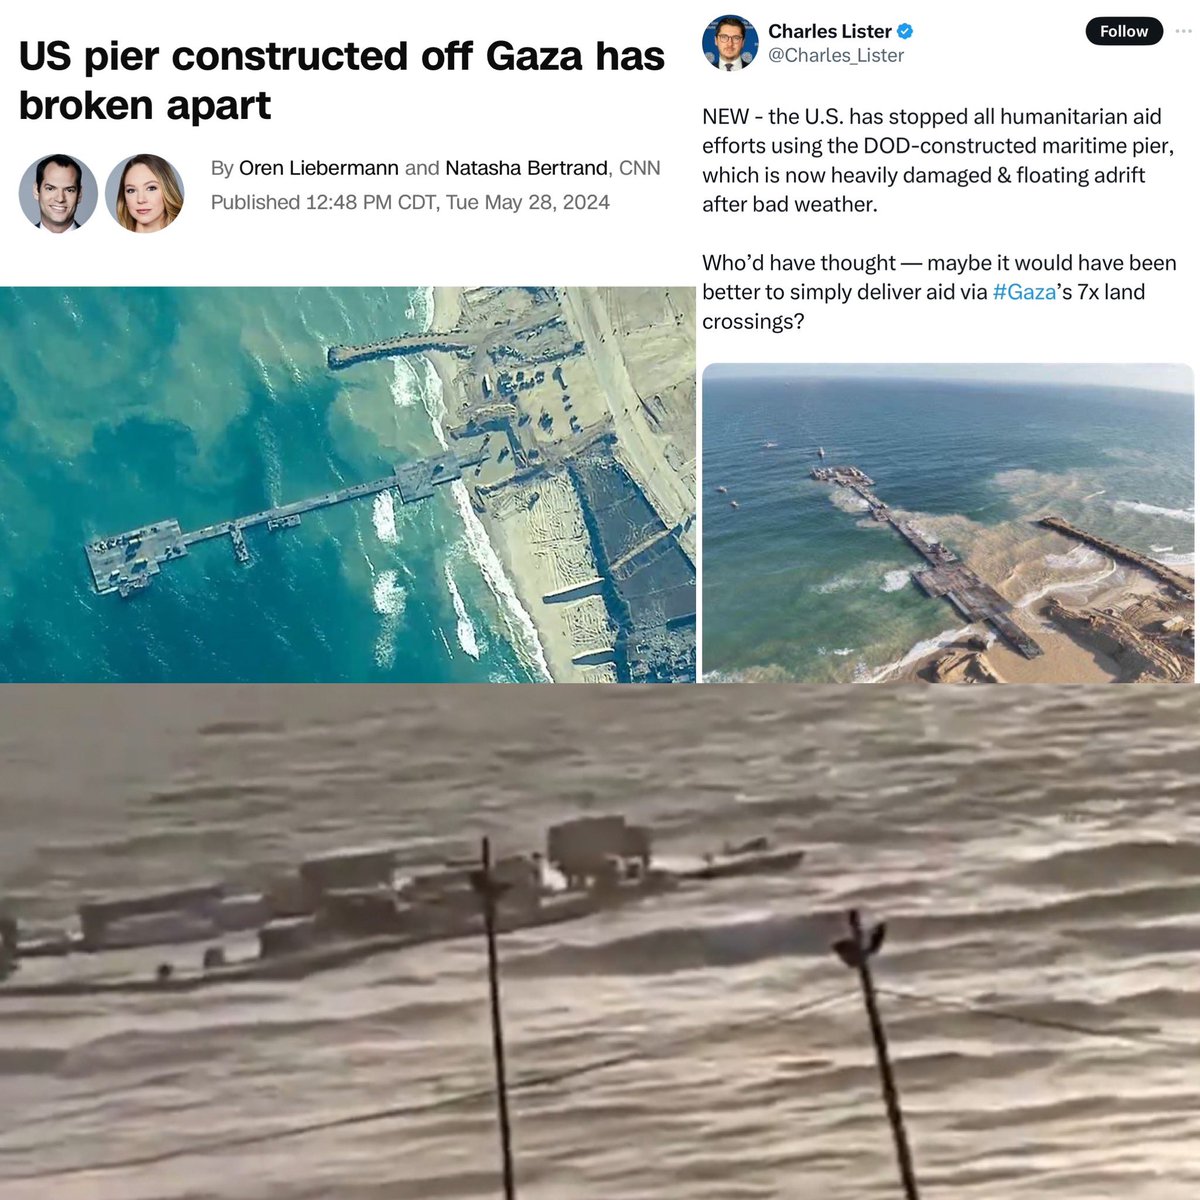 CNN: “The temporary pier constructed by 🇺🇸 military to transport aid into Gaza broke apart in heavy seas…” cnn.com/2024/05/28/pol…